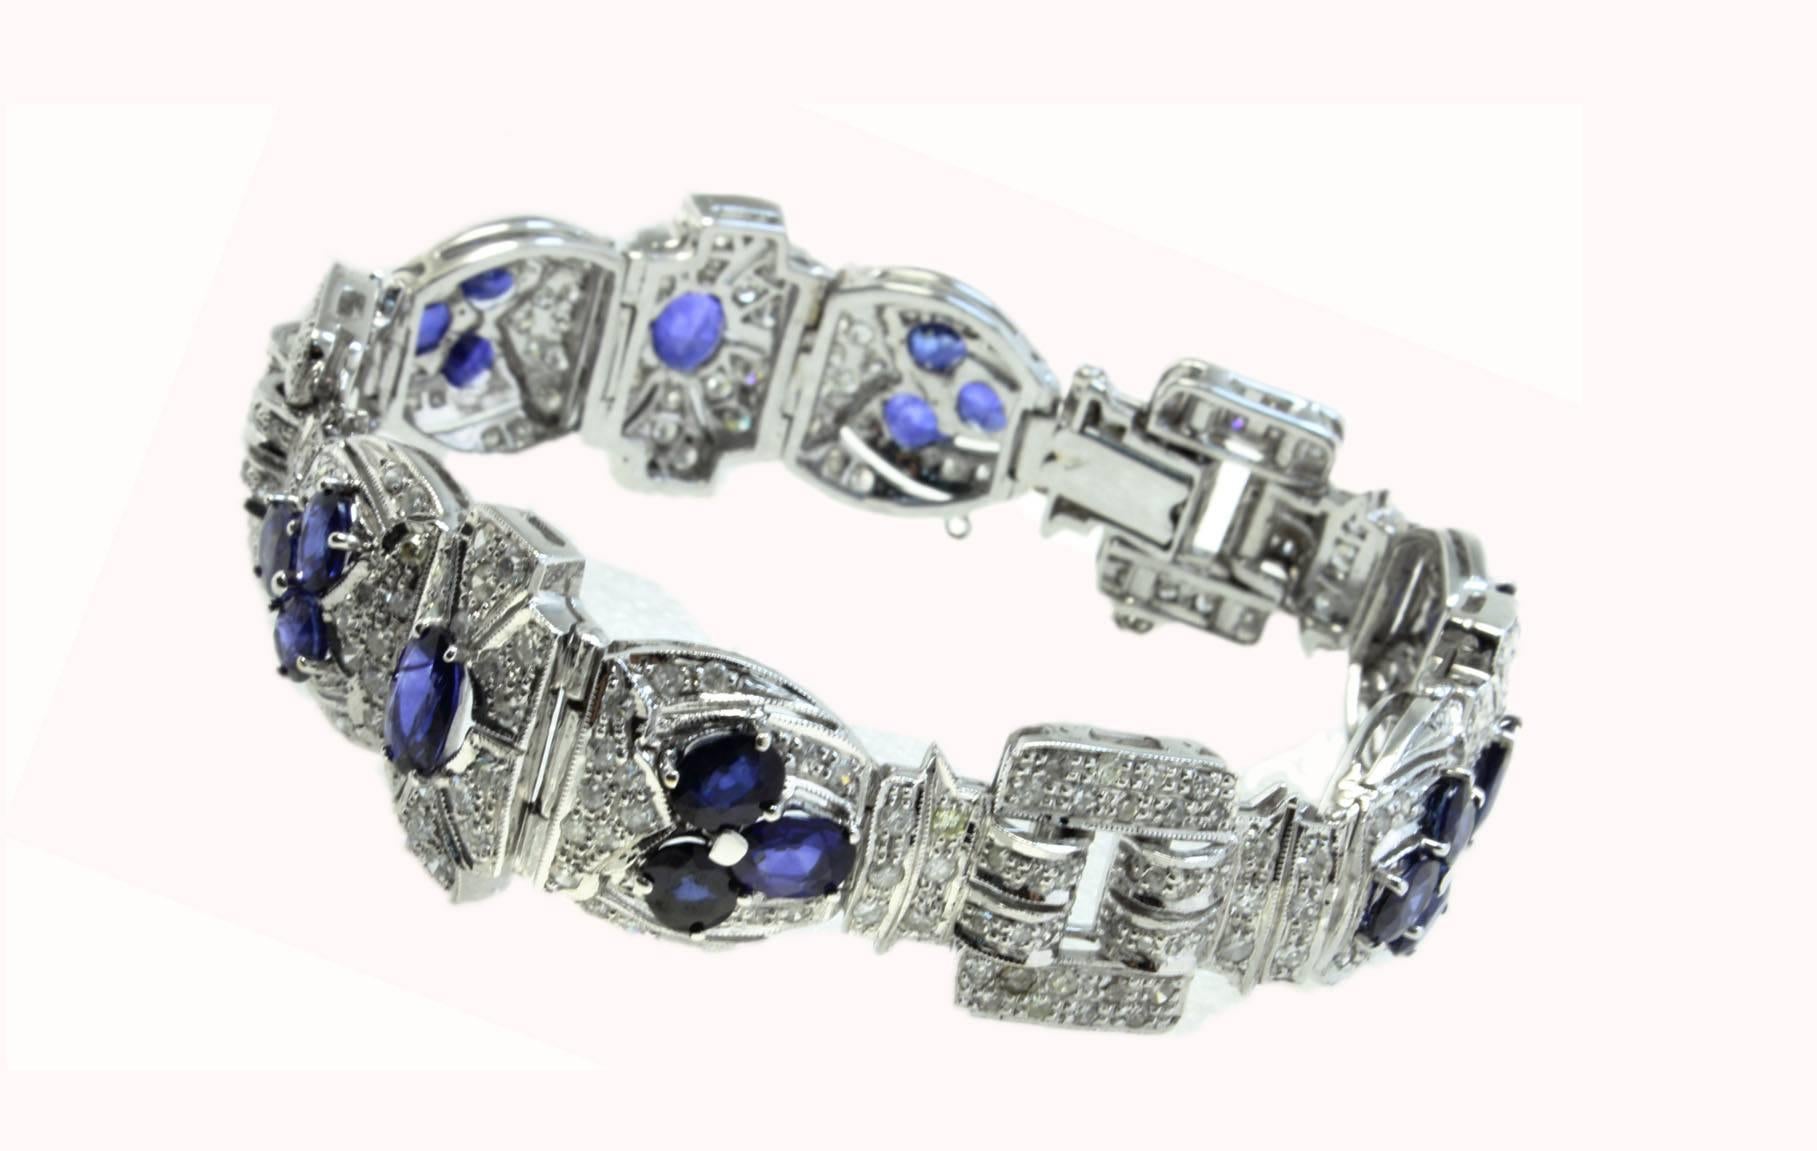 Charming choosing of colors for this retro bracelet composed of shiny diamonds and embellished with drops of blue sapphires. All is mounted in 18 Kt white gold.
Tot weight 36.3 g
Diamonds 5.42 ct
Blue sapphires 10.52 ct
Rf. gugef

For any enquires,